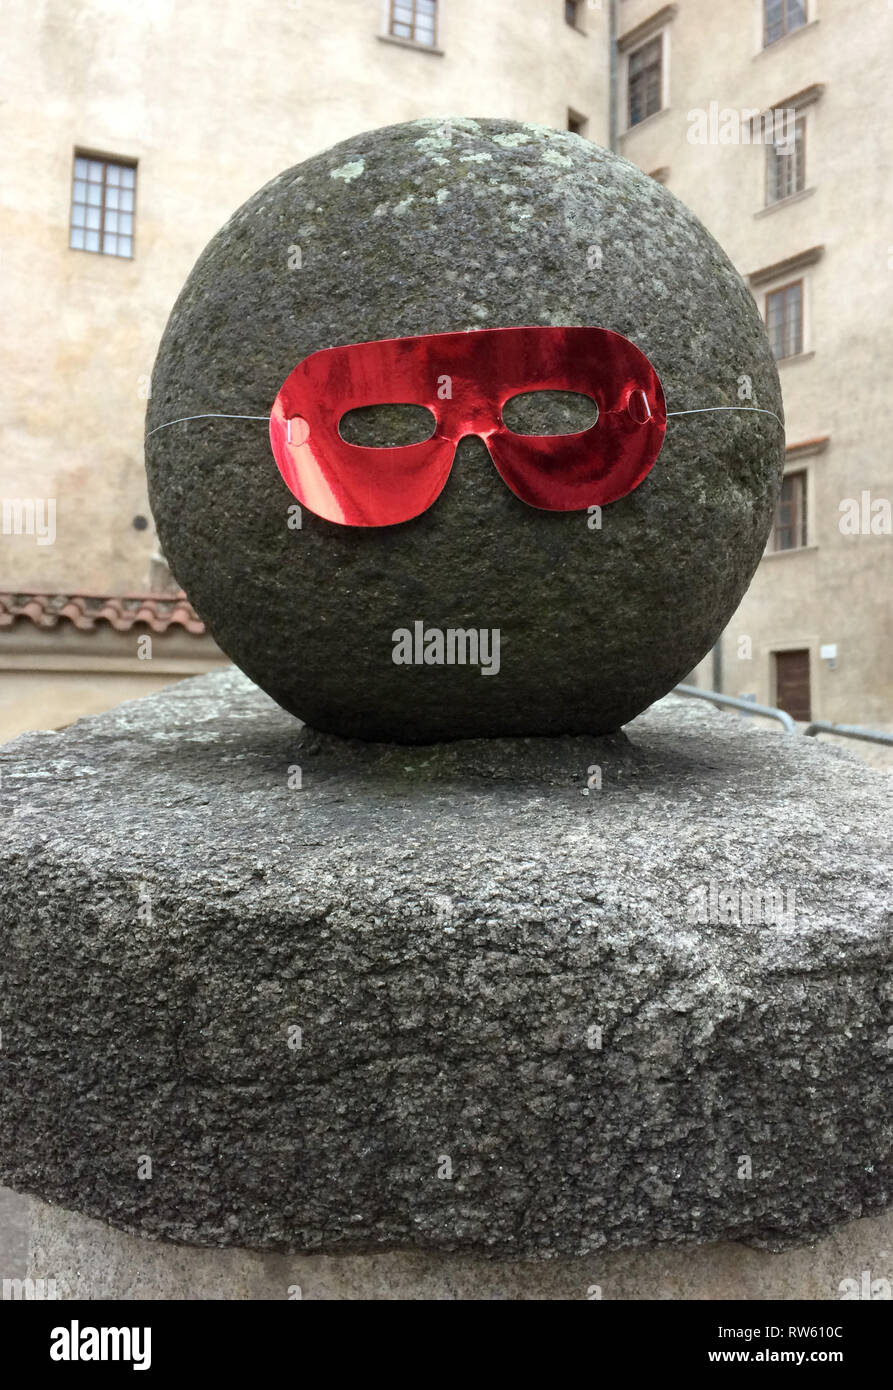 New Year mask put on the stone ball in the courtyard of the Krumlov Chateau in Český Krumlov, Czech Republic, pictured on 1 January 2019. Stock Photo